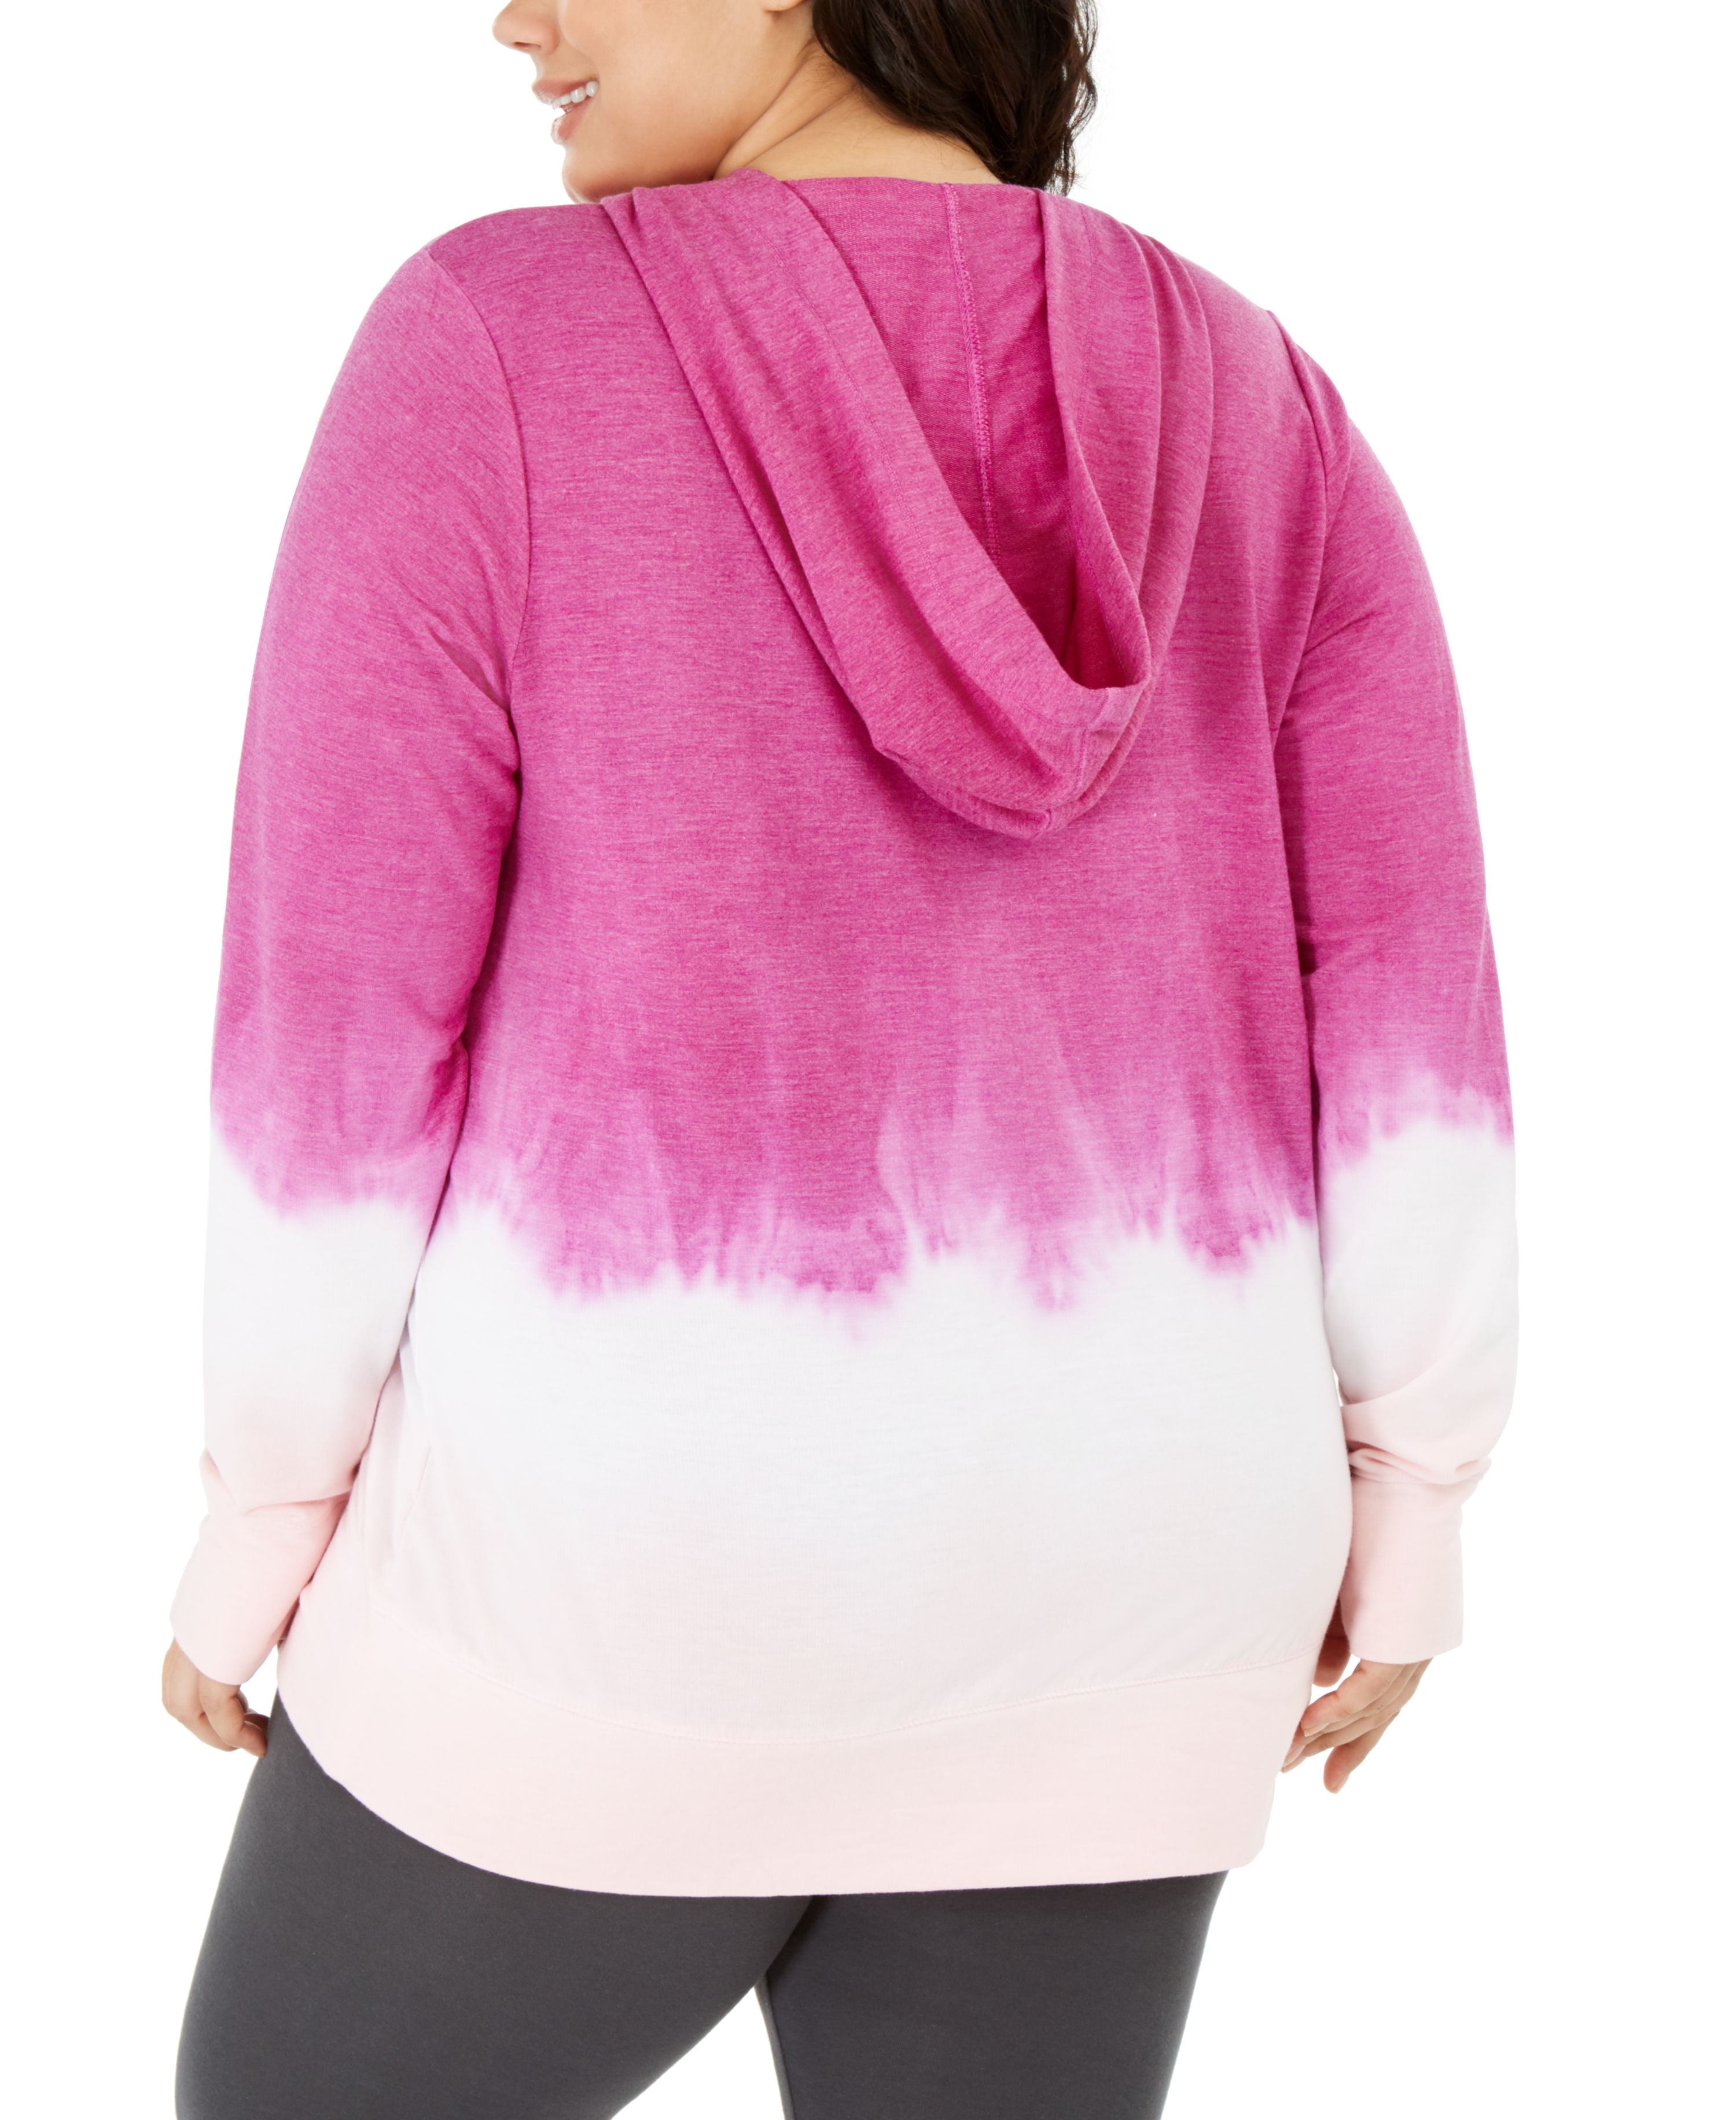 Ideology Womens Plus Size Space-Dyed Hoodie 